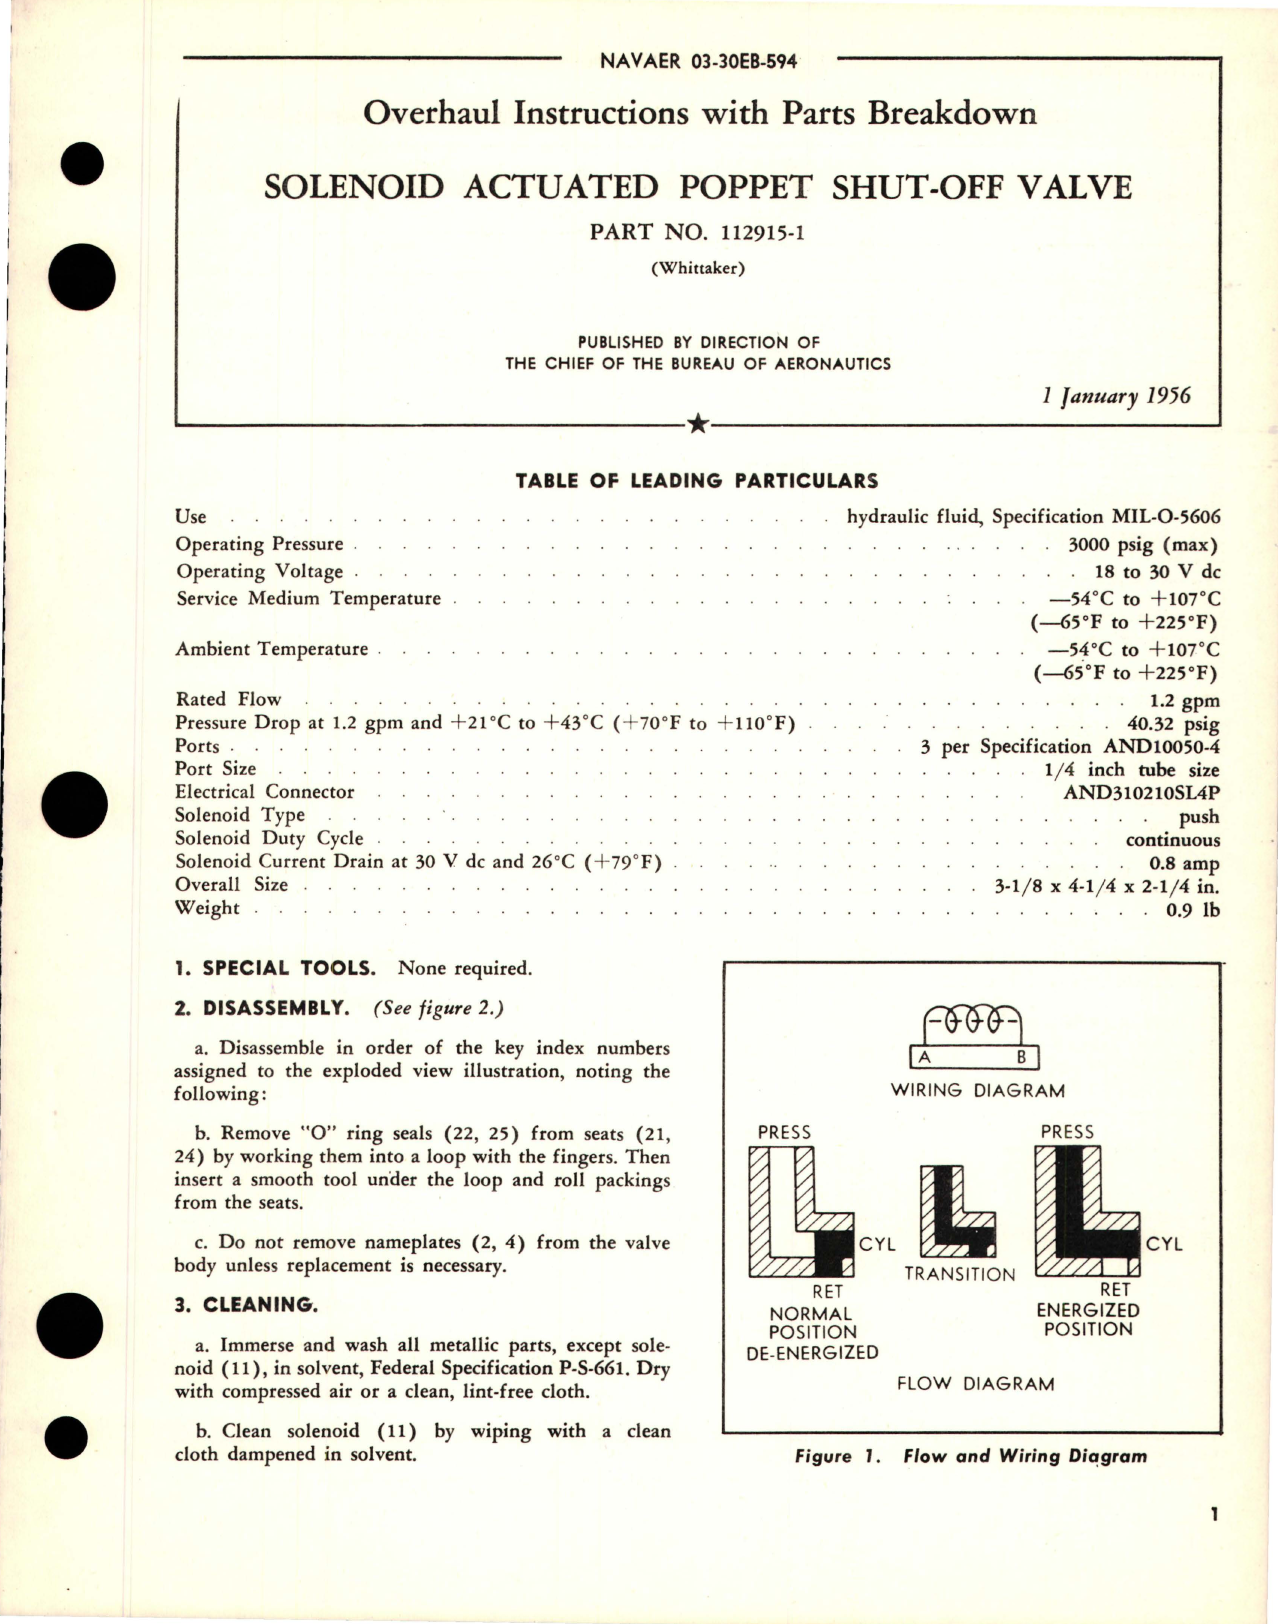 Sample page 1 from AirCorps Library document: Overhaul Instructions with Parts Breakdown for Solenoid Actuated Poppet Shutoff Valve - Part 112915-1 